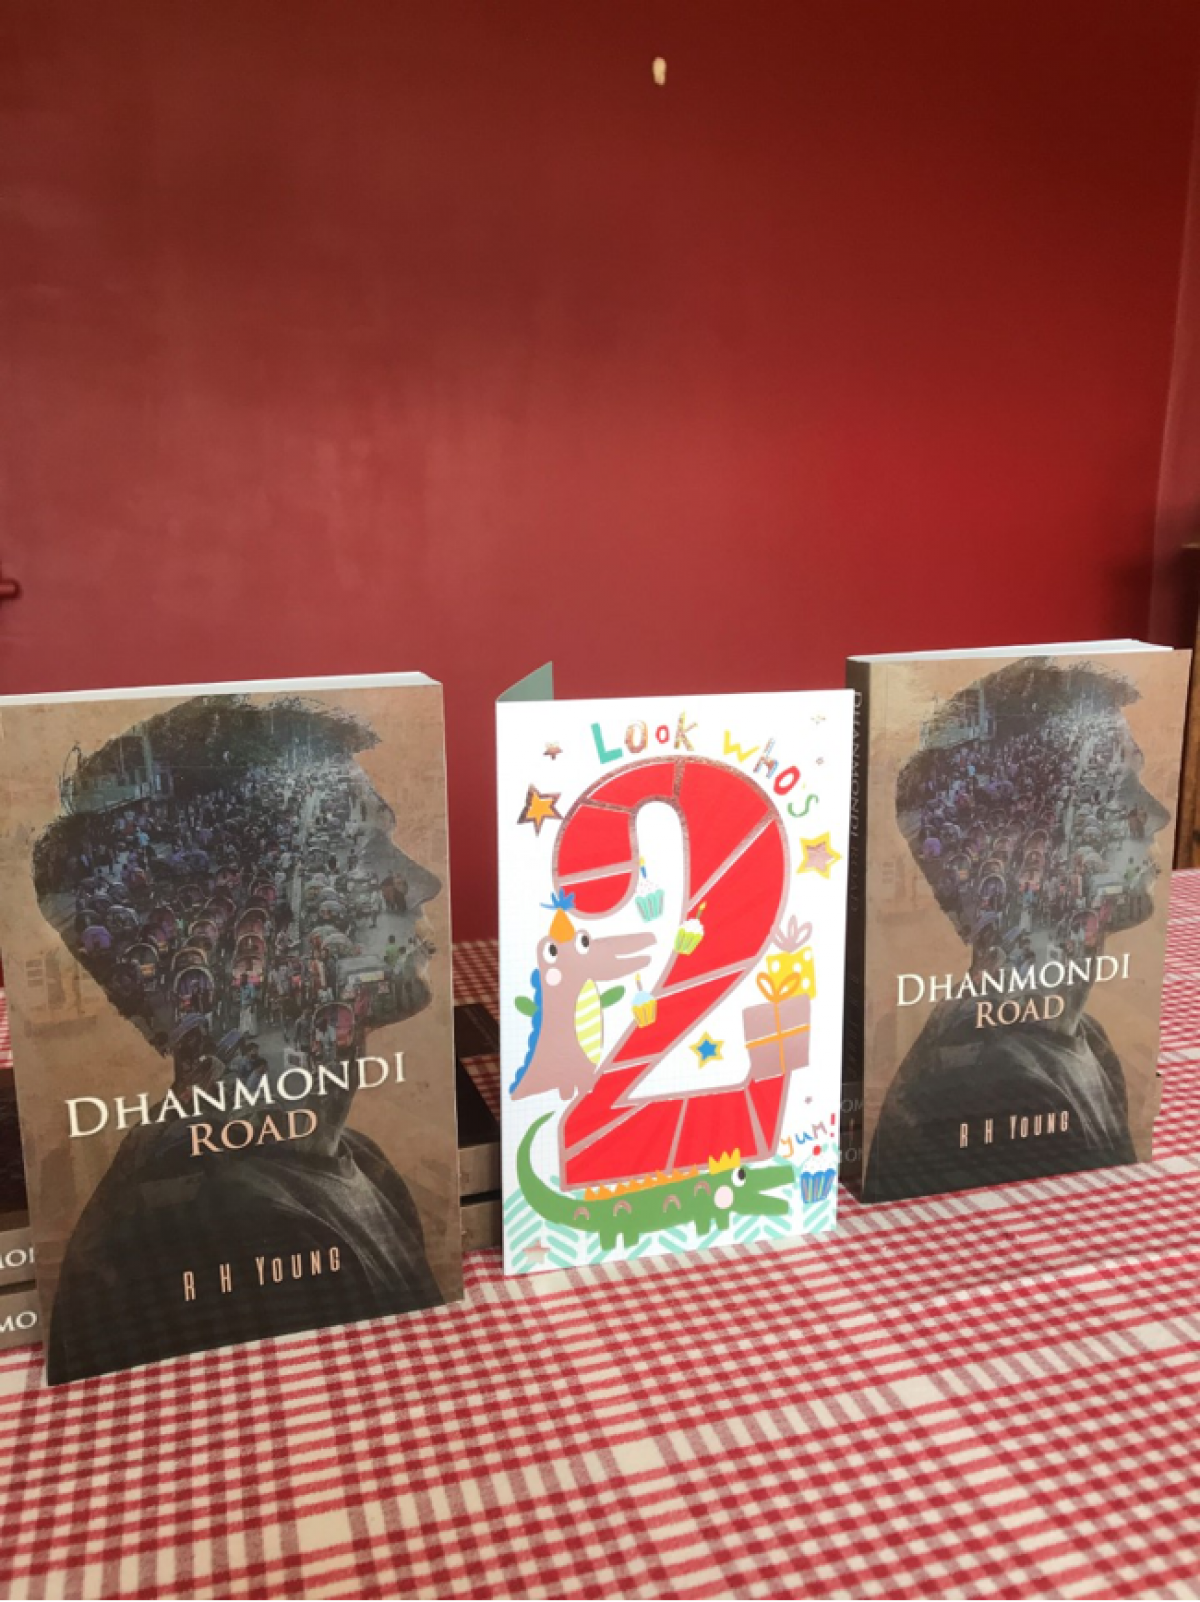 Dhanmondi-Road-by-R H-Young-Celebrates-2-Years-with-Austin-Macauley-Publishers